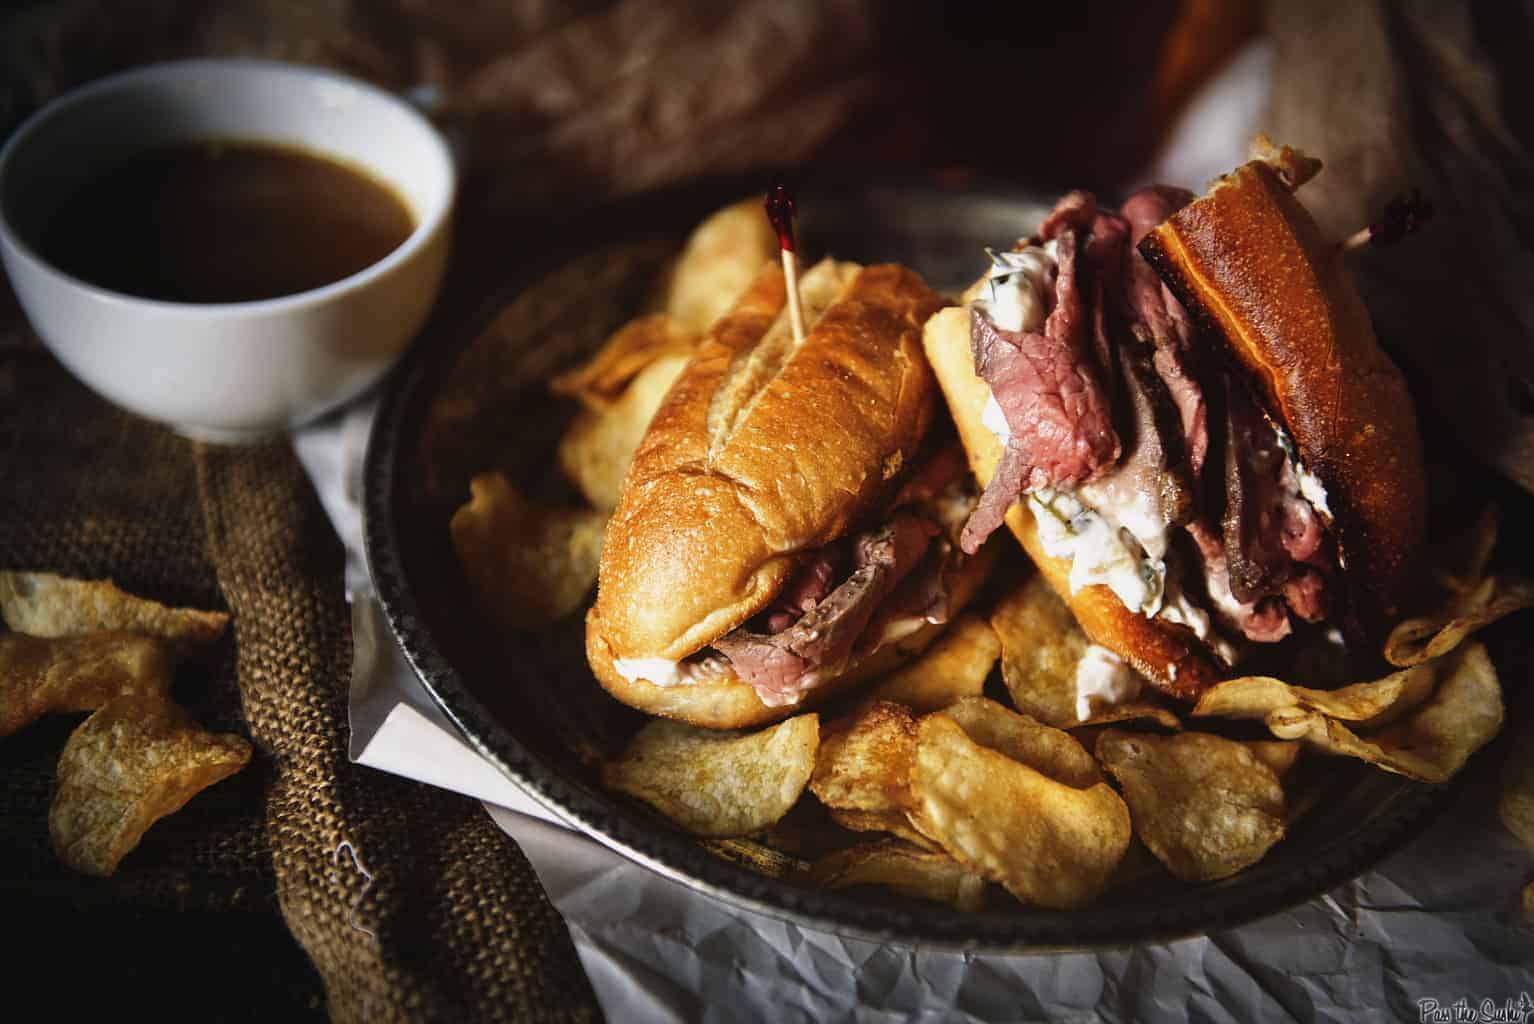 Tender sliced beef and onion spread in a toasted french roll on a platter with chips.